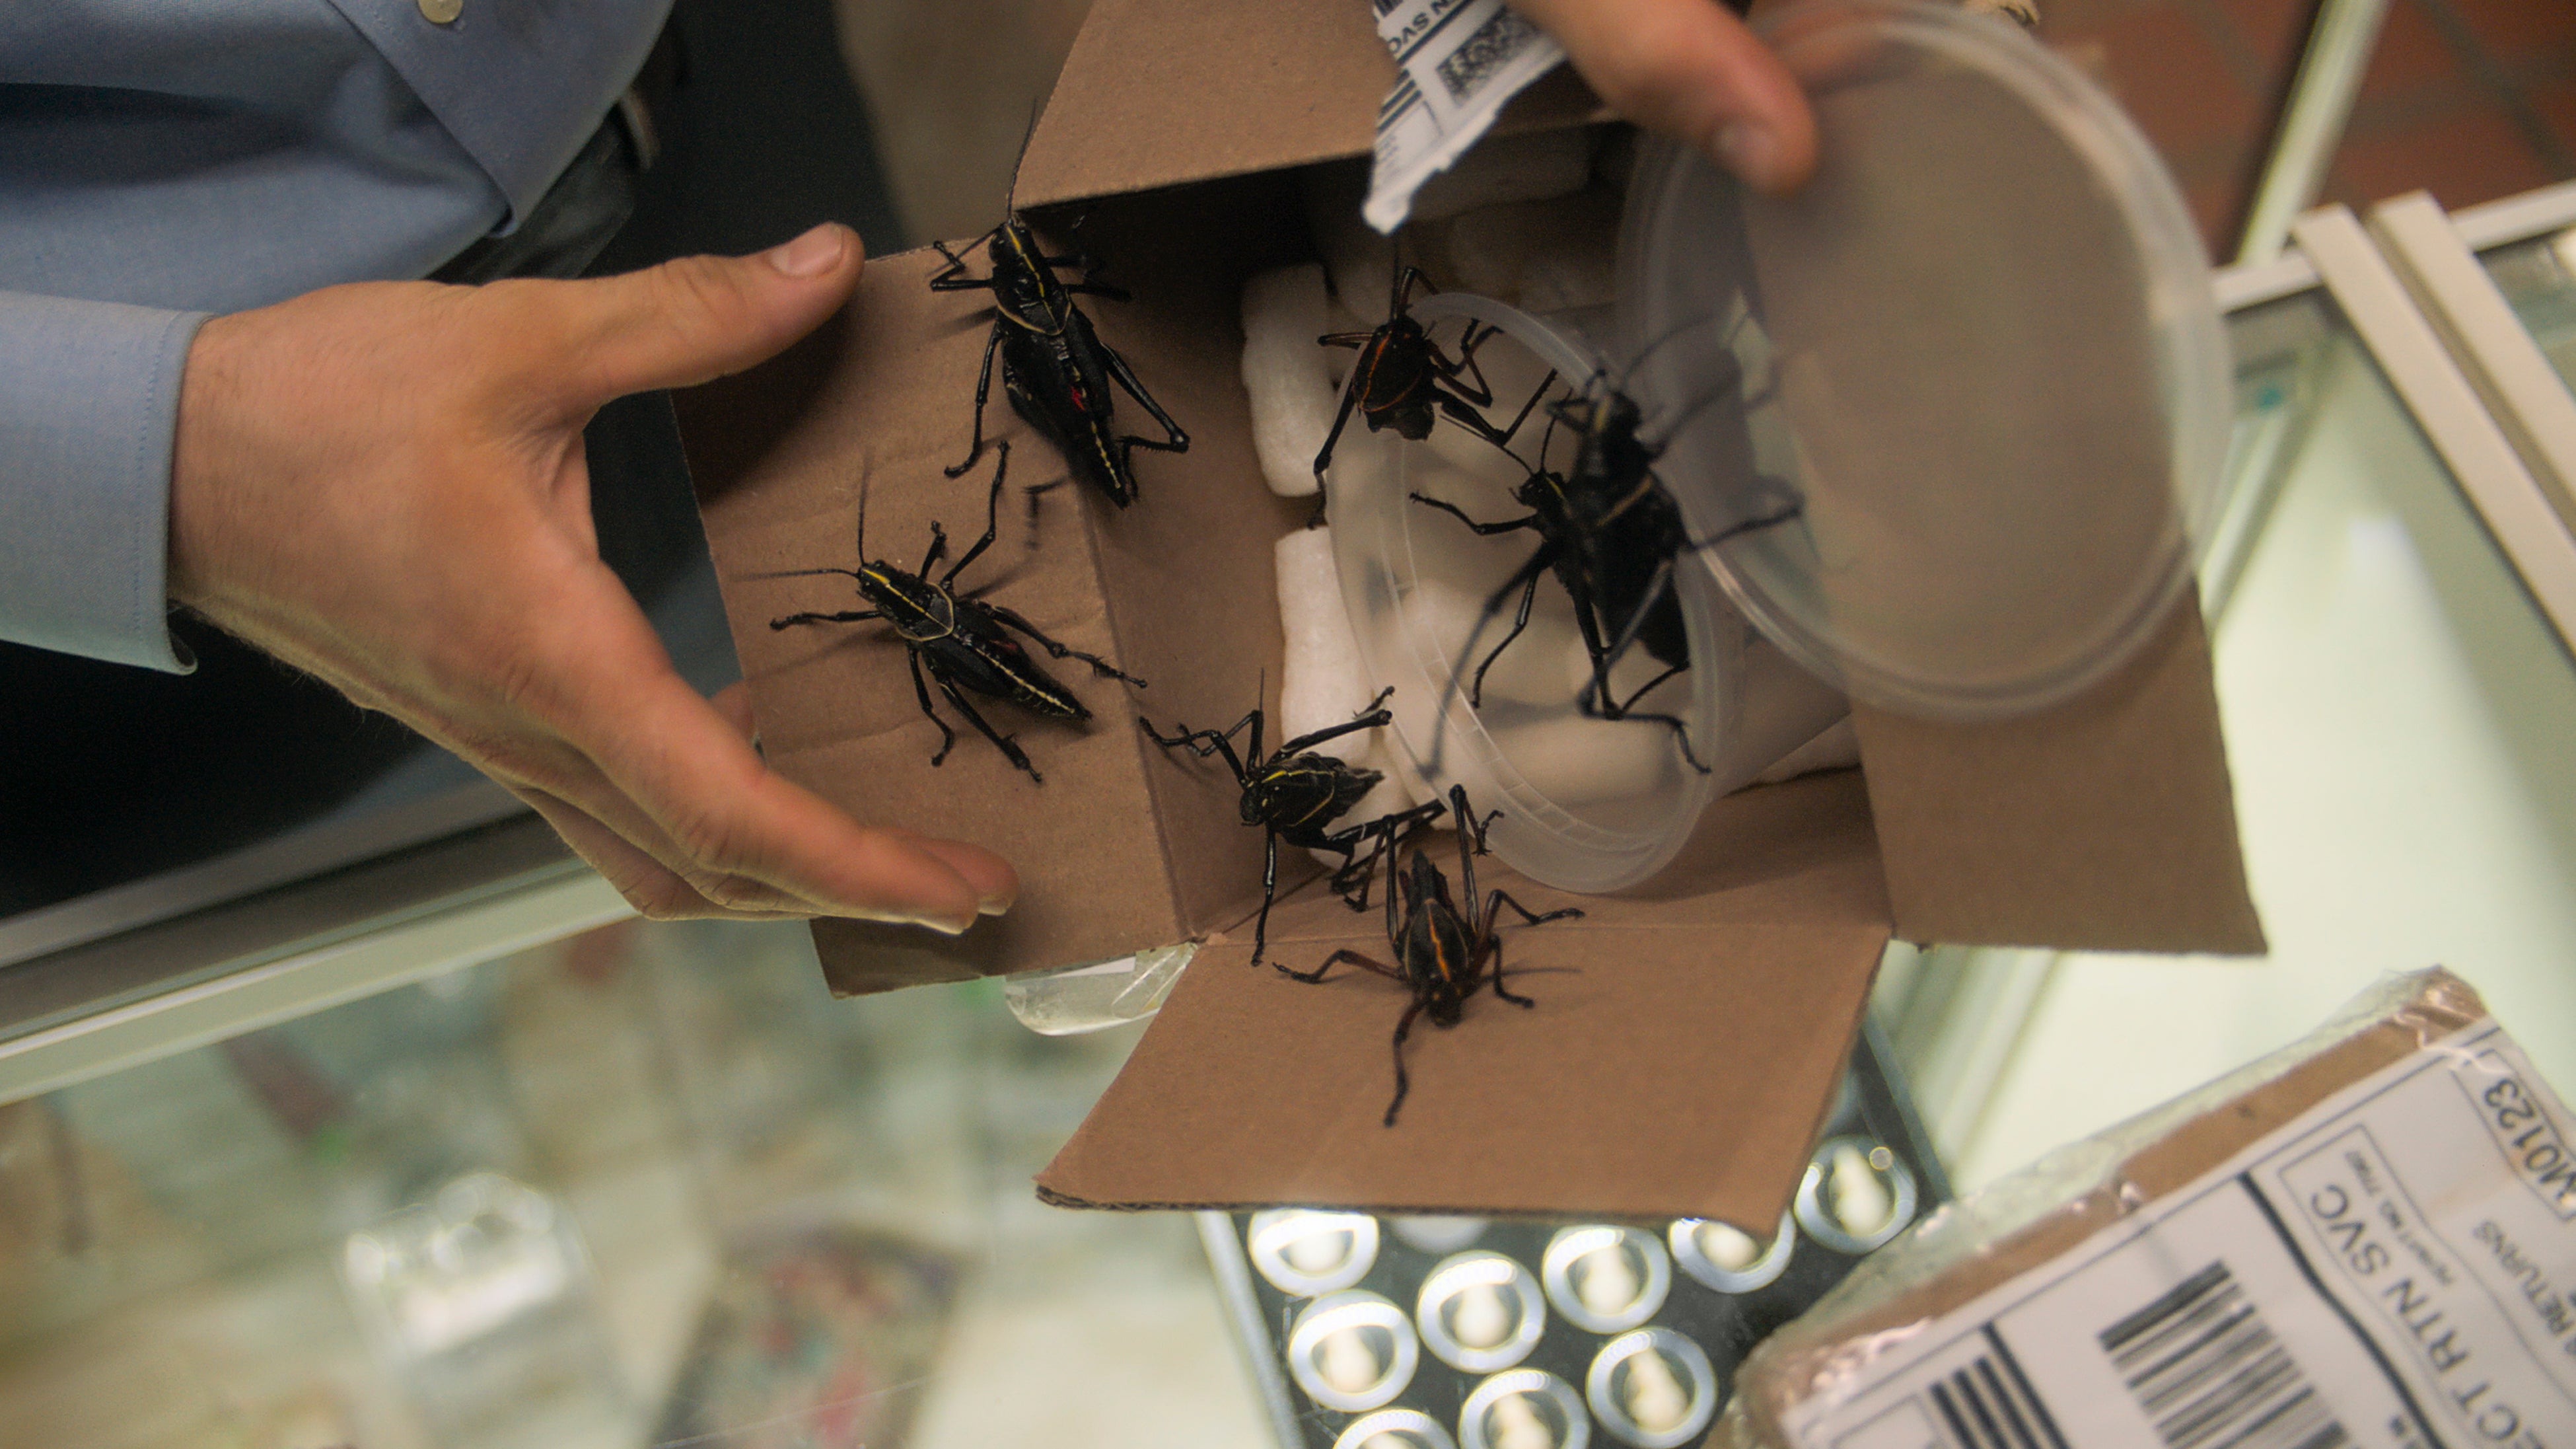 The robbers took 80 per cent of the insectarium’s entire collection